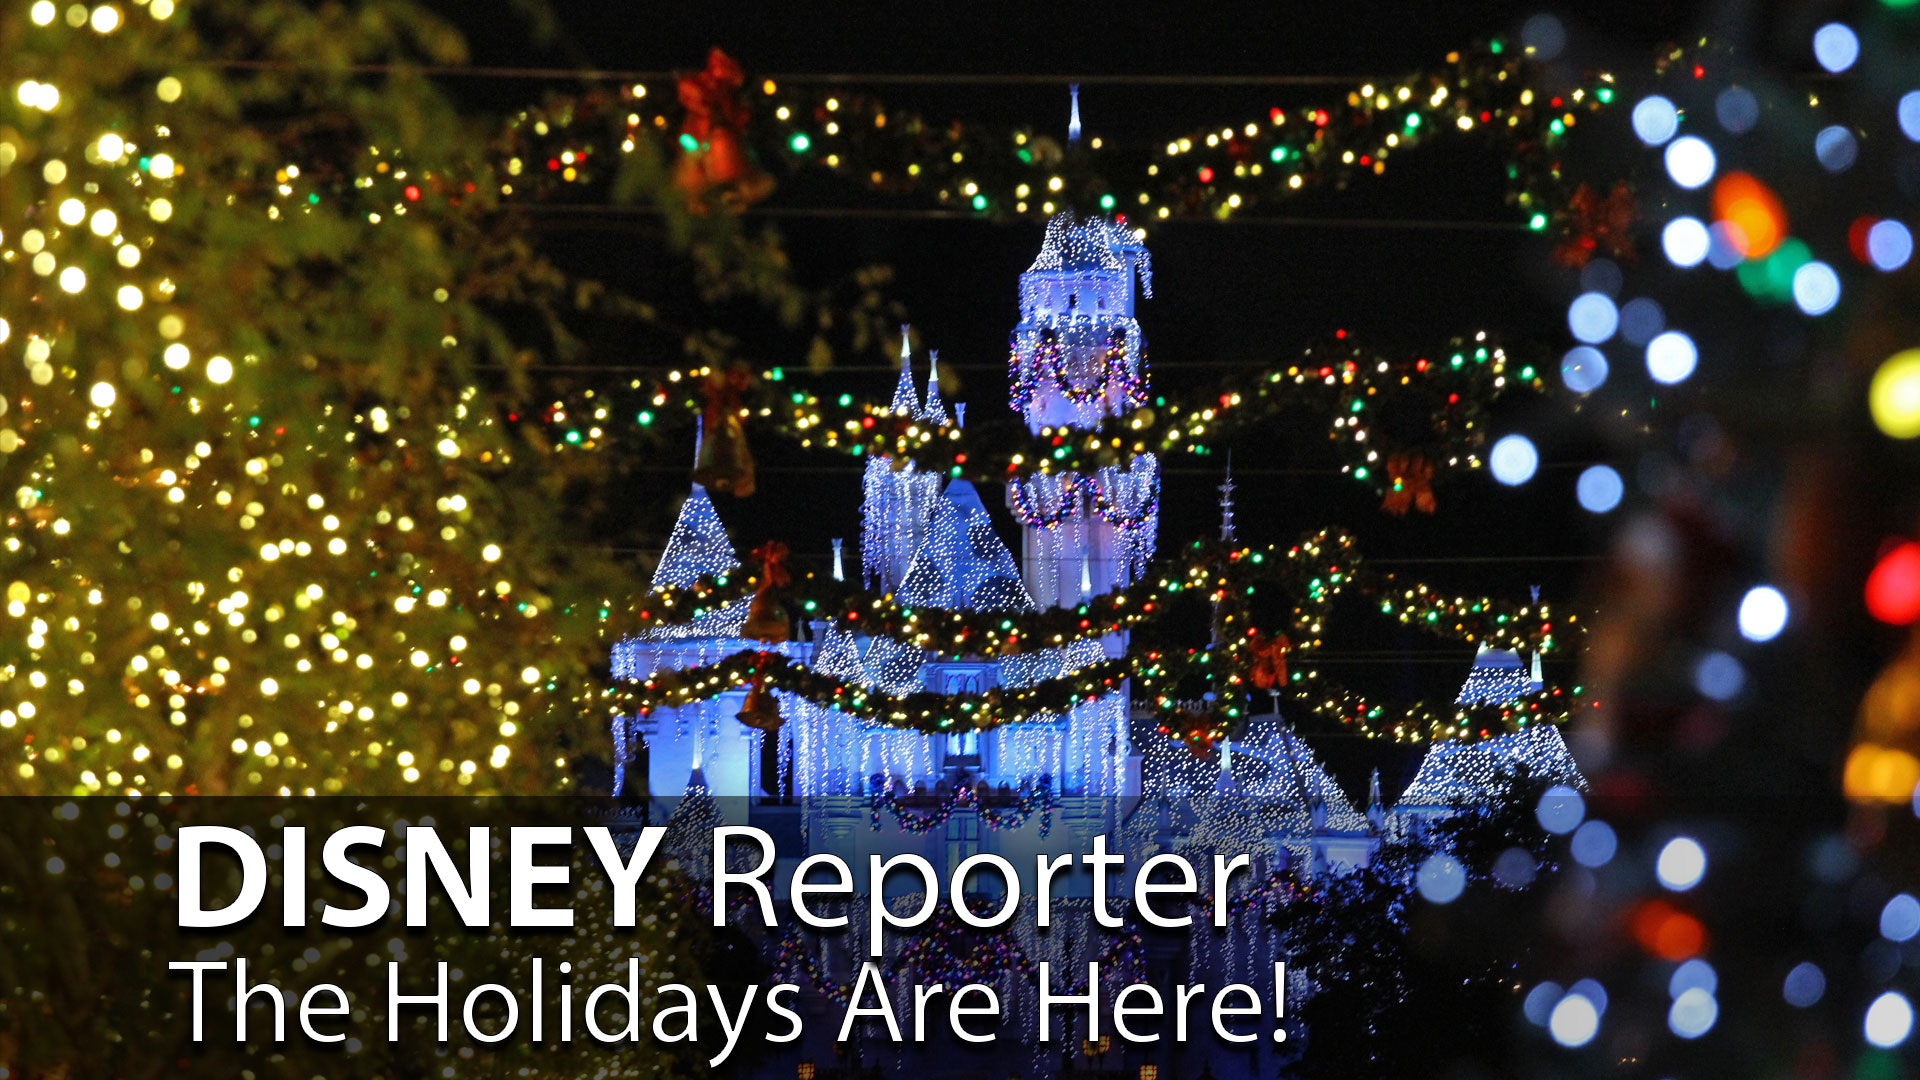 The Holidays Are Here! – DISNEY Reporter